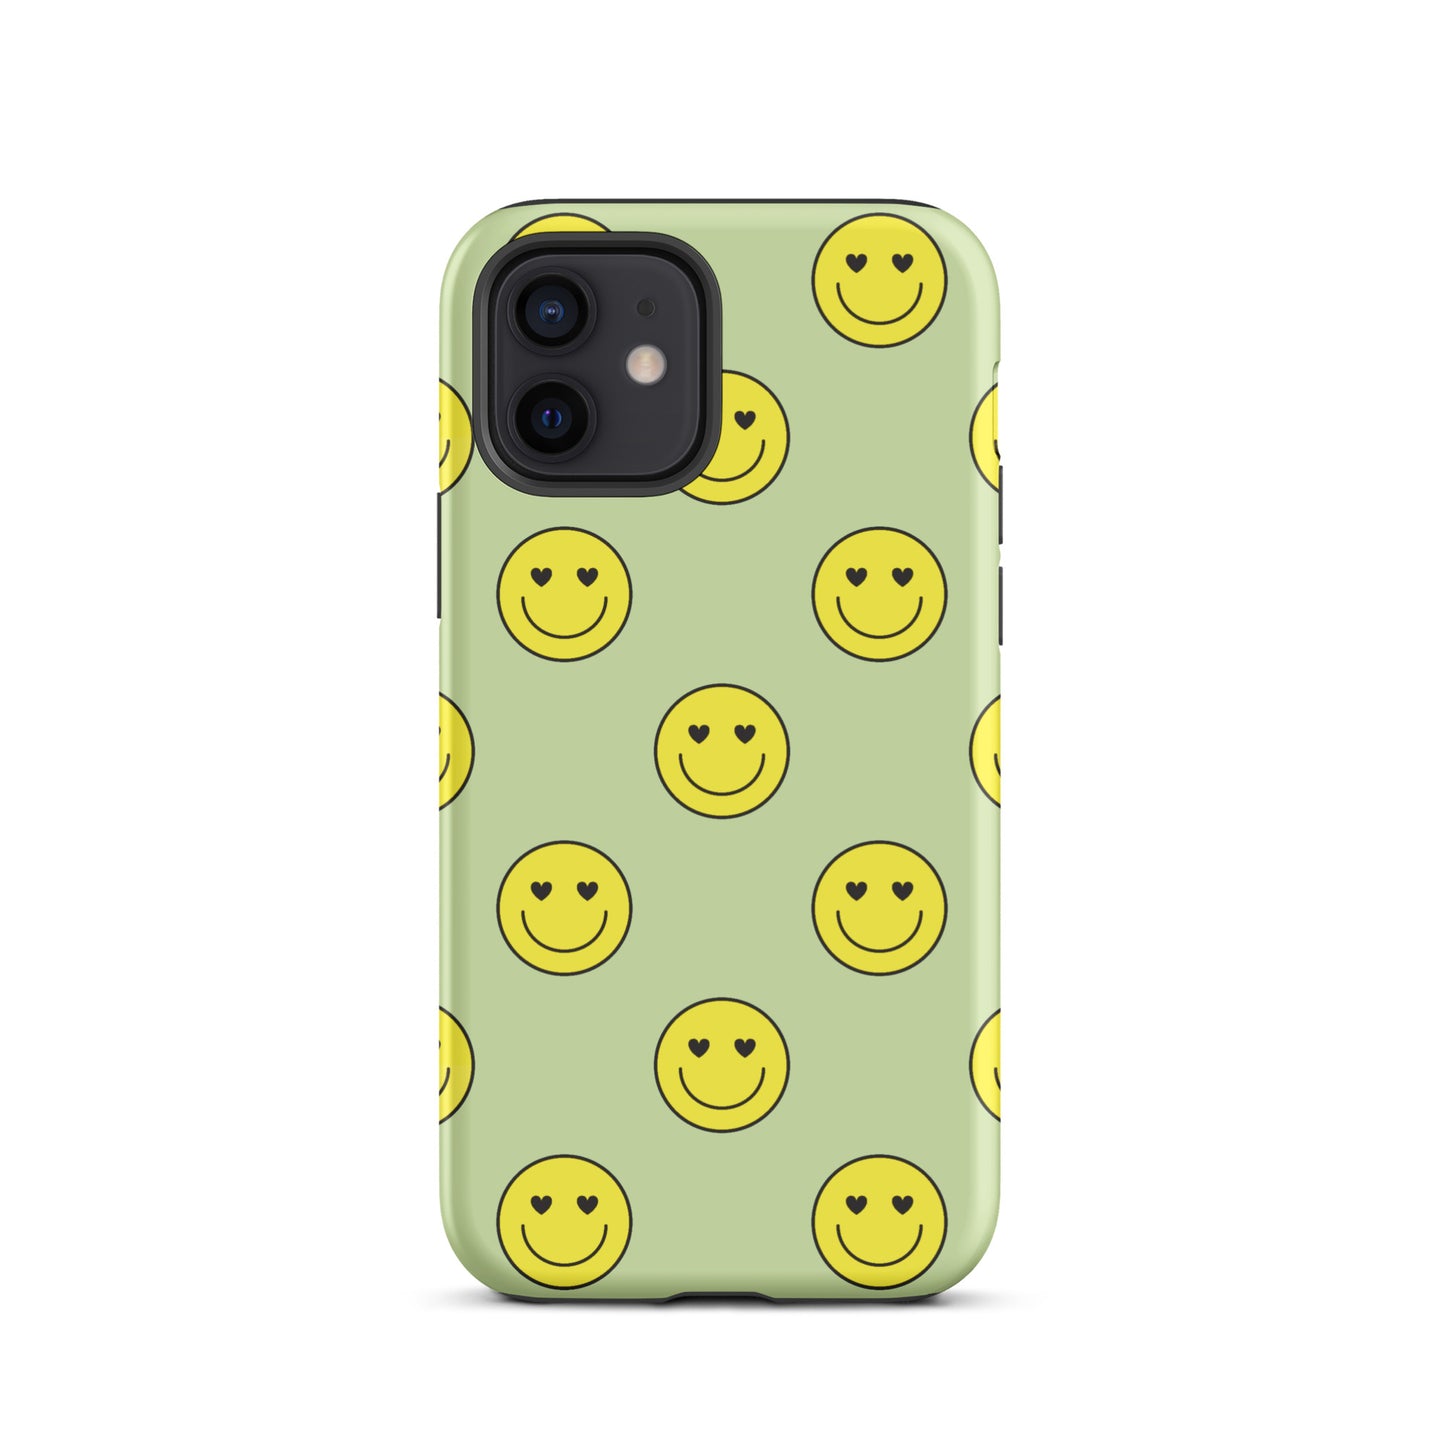 Neon Smiley Faces iPhone Case iPhone 12 Matte